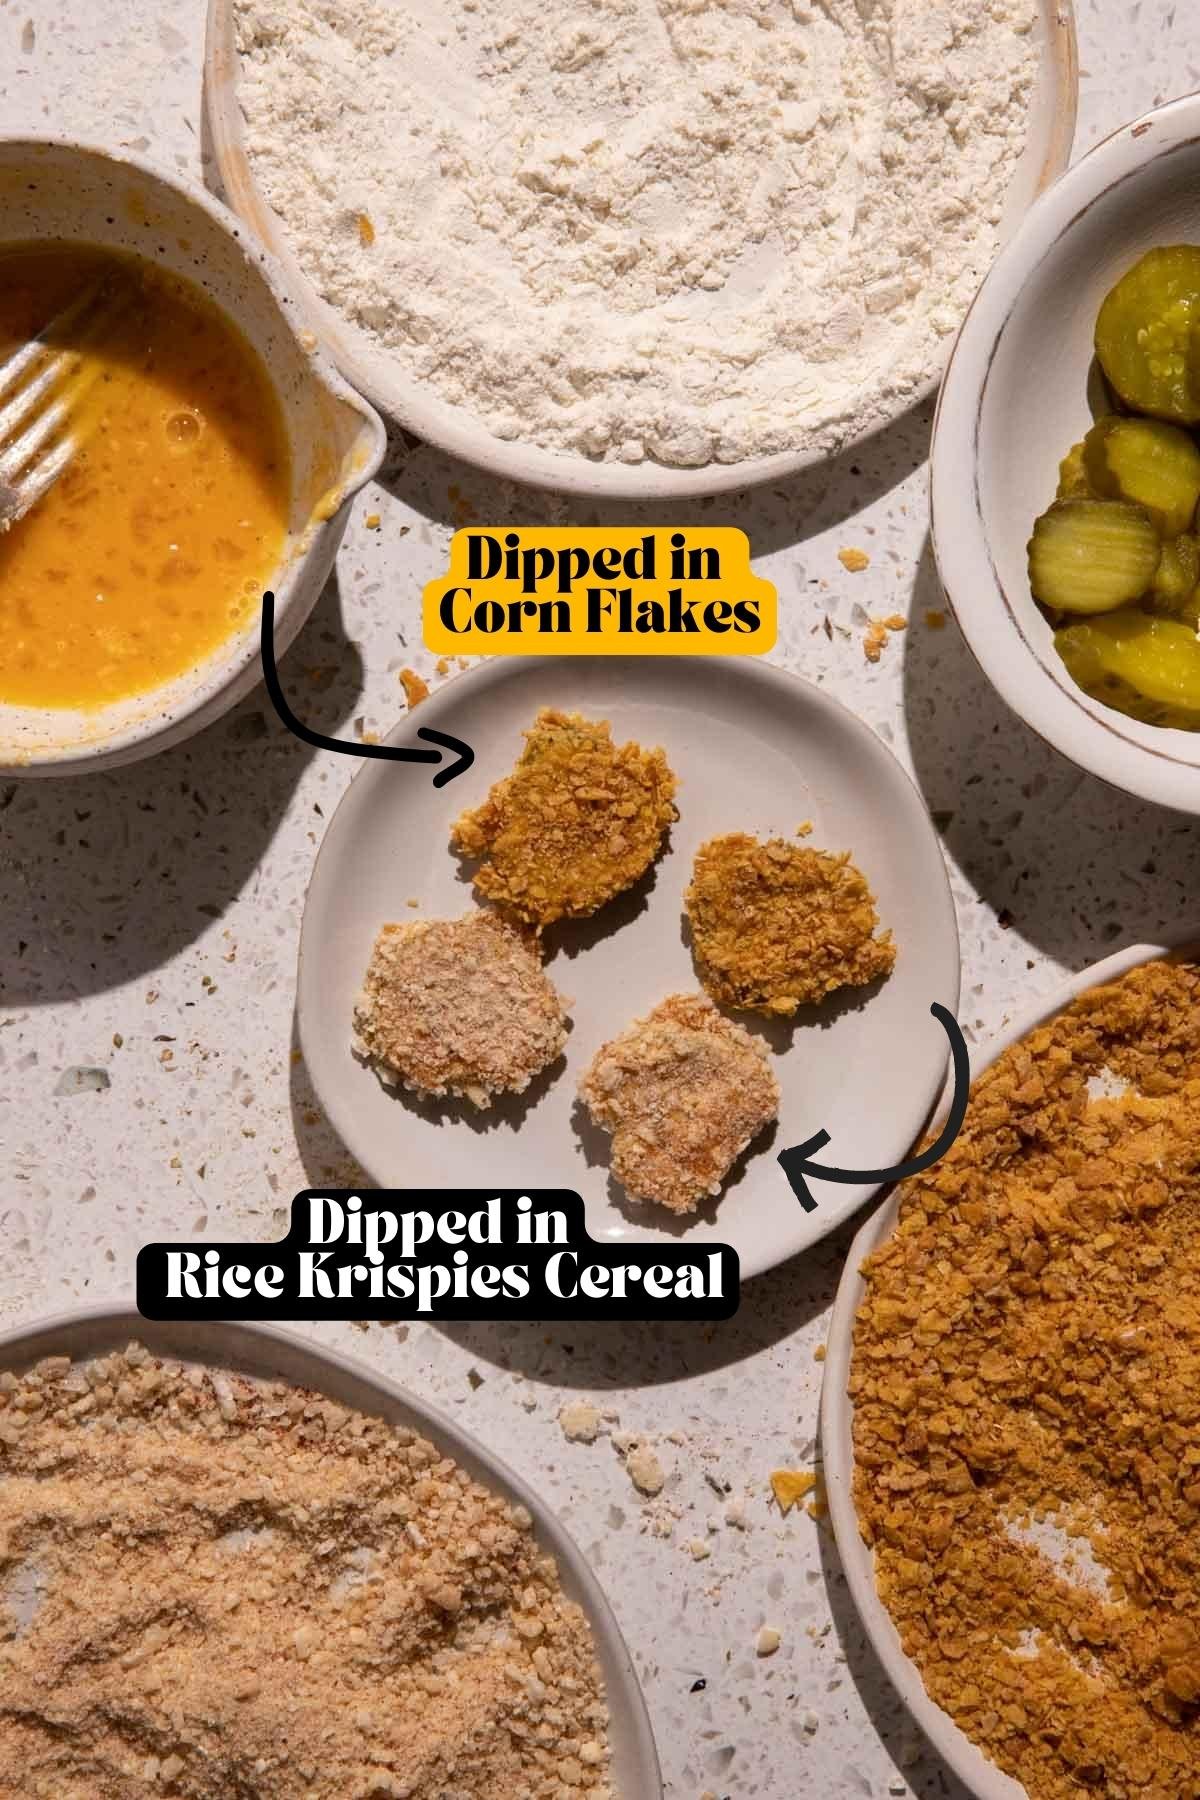 Fried pickles coated in a cereal crust on plates